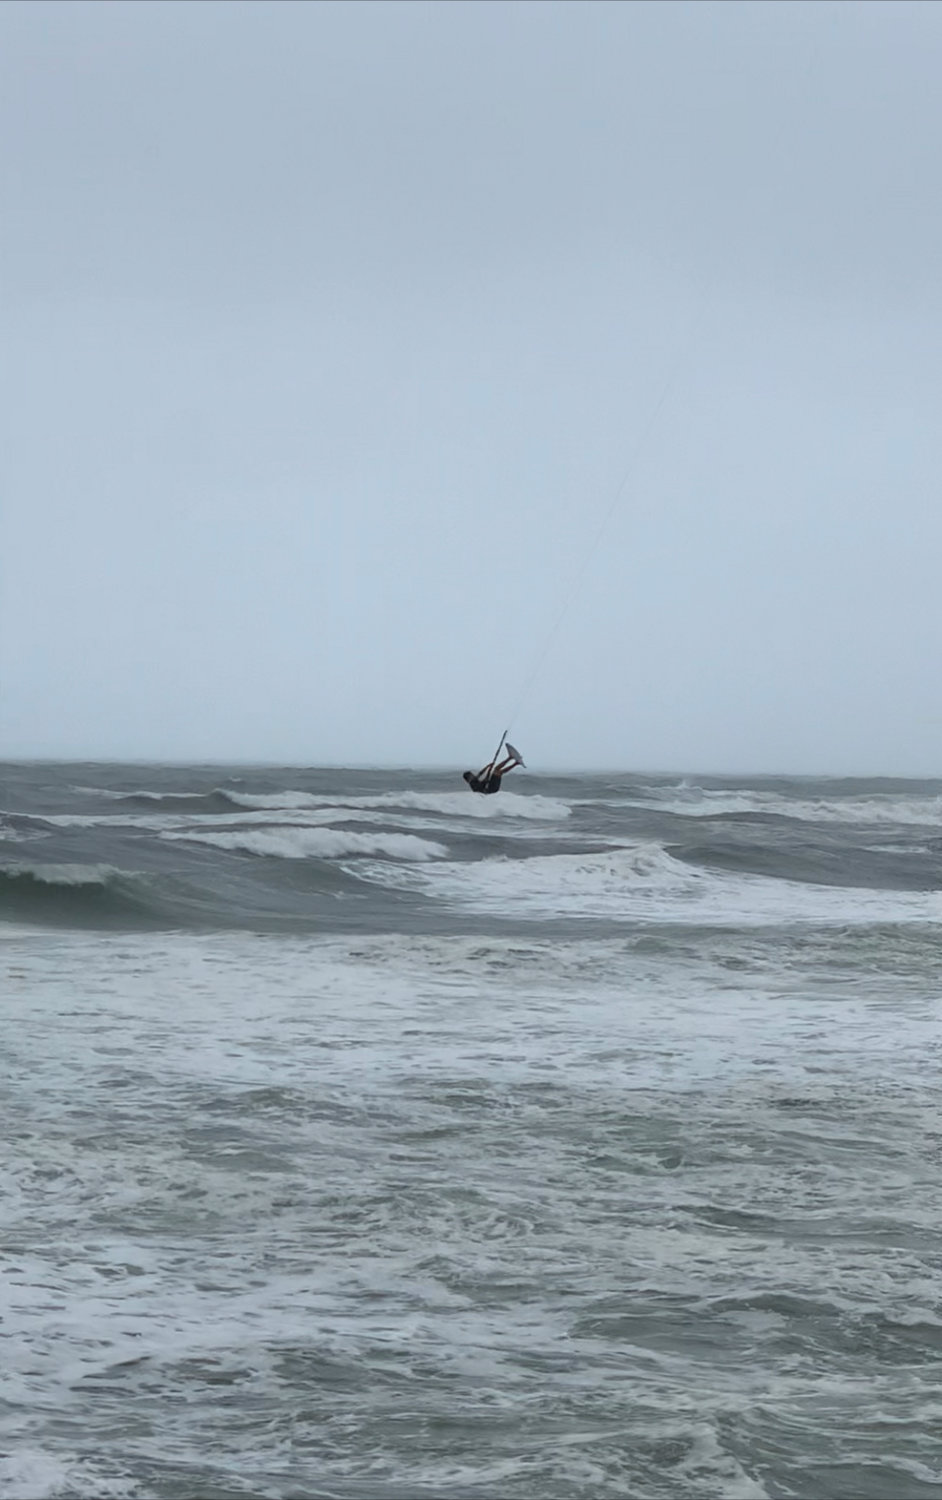 A kiteboarder at Cisco.